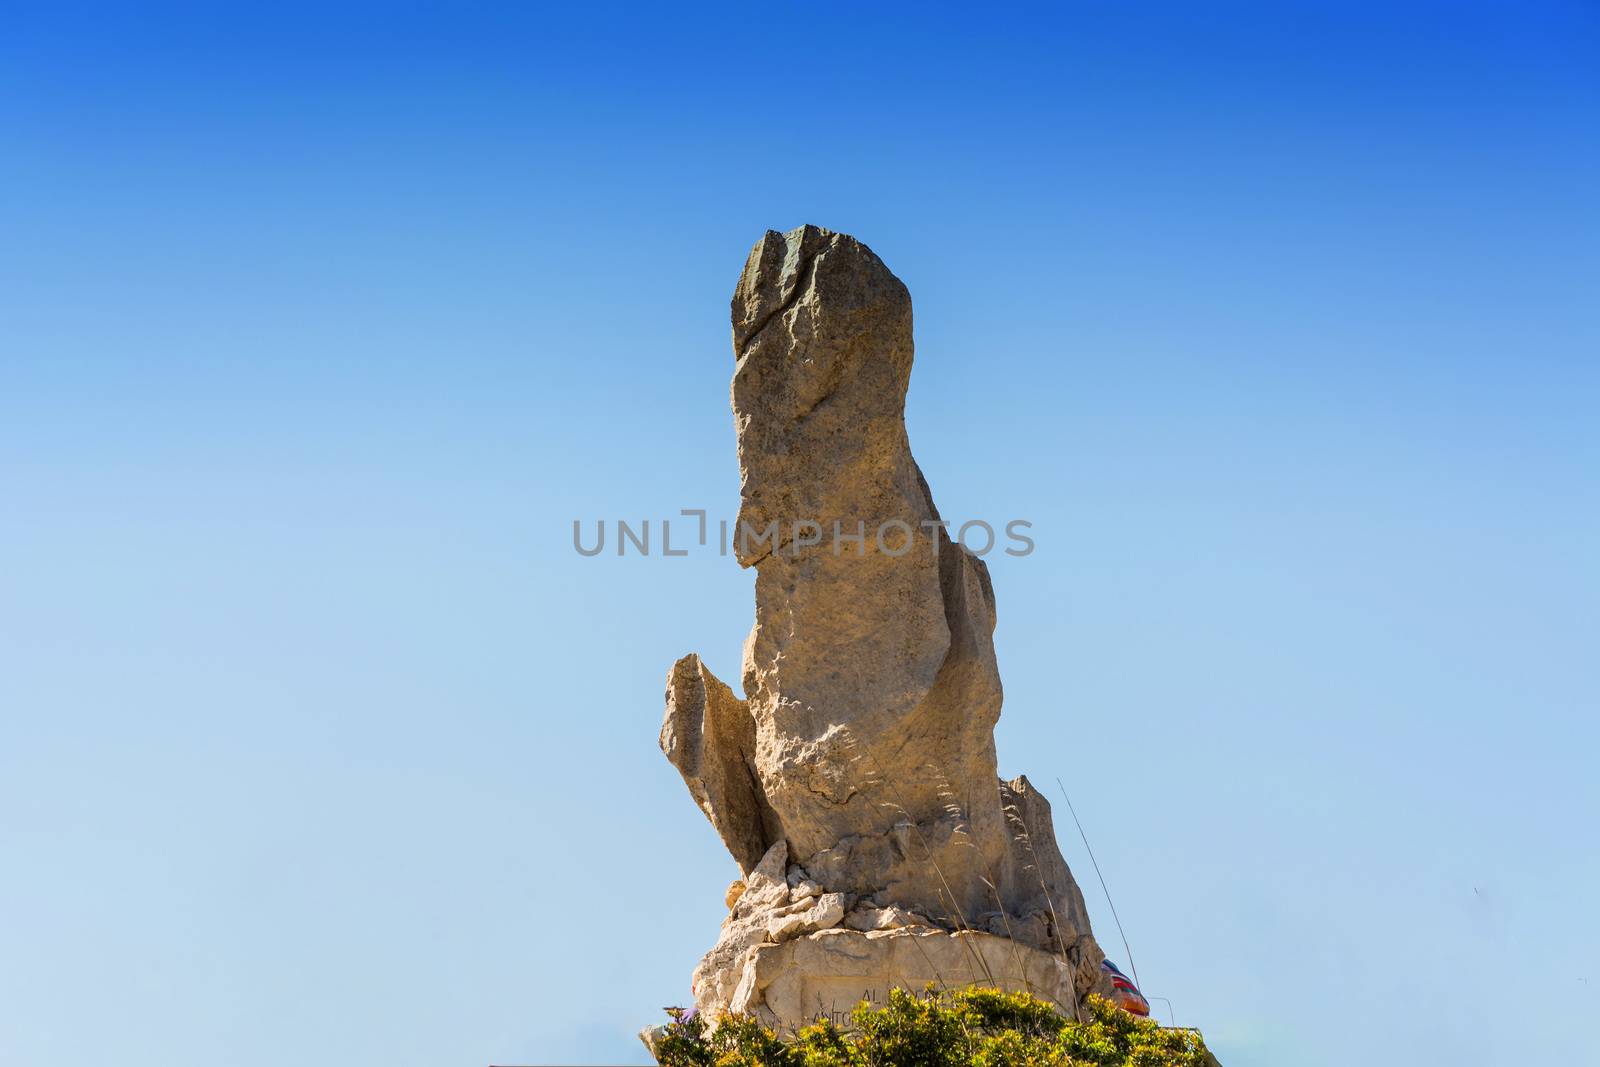 Monument to the engineer Antonio Parietti Coll at the beautiful viewpoint El Mirador es Colomer on Mallorca, Spain.